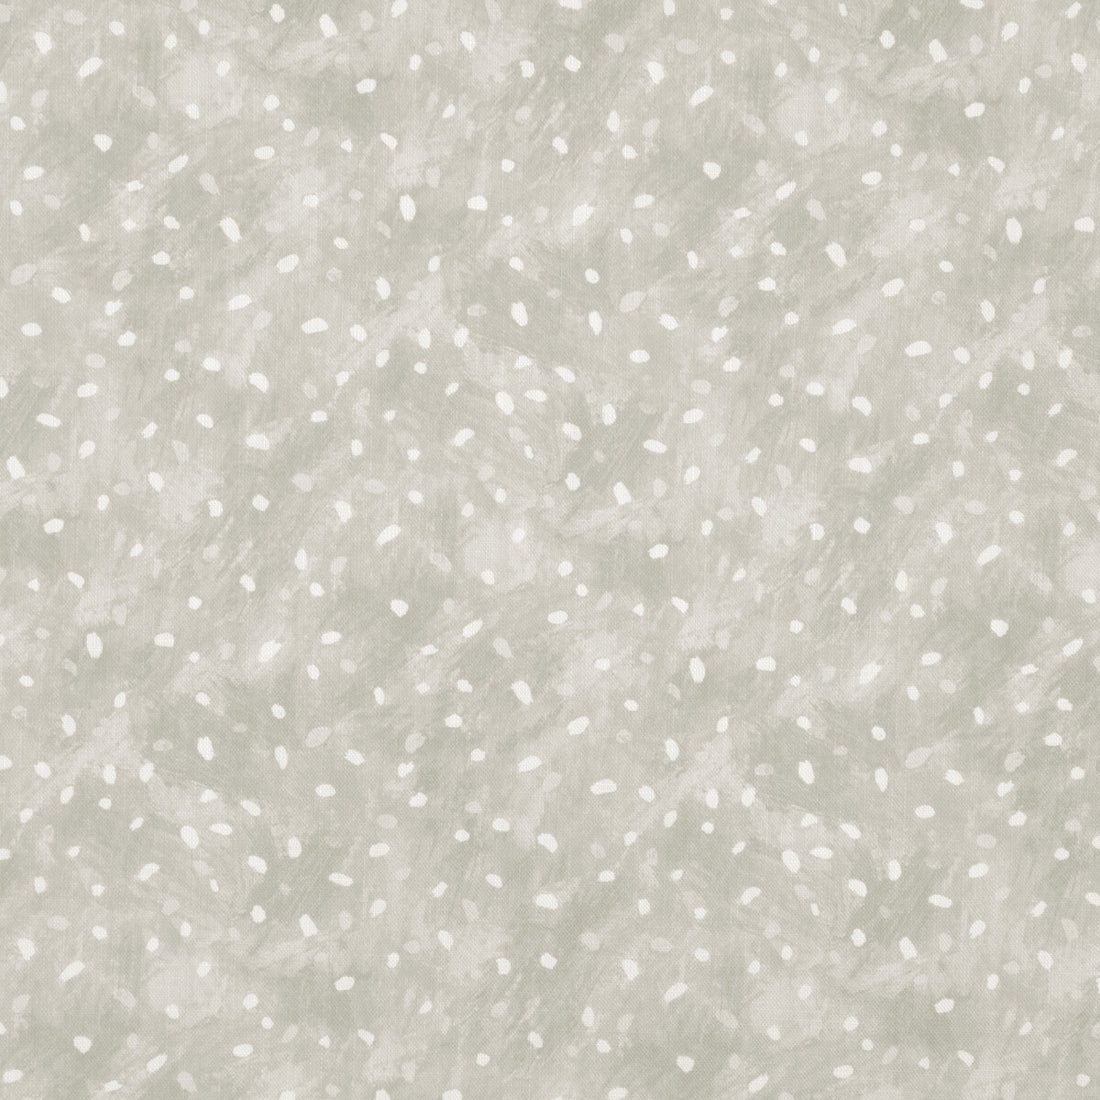 Starry Sky fabric in wheat color - pattern STARRY SKY.106.0 - by Kravet Basics in the Mid-Century Modern collection